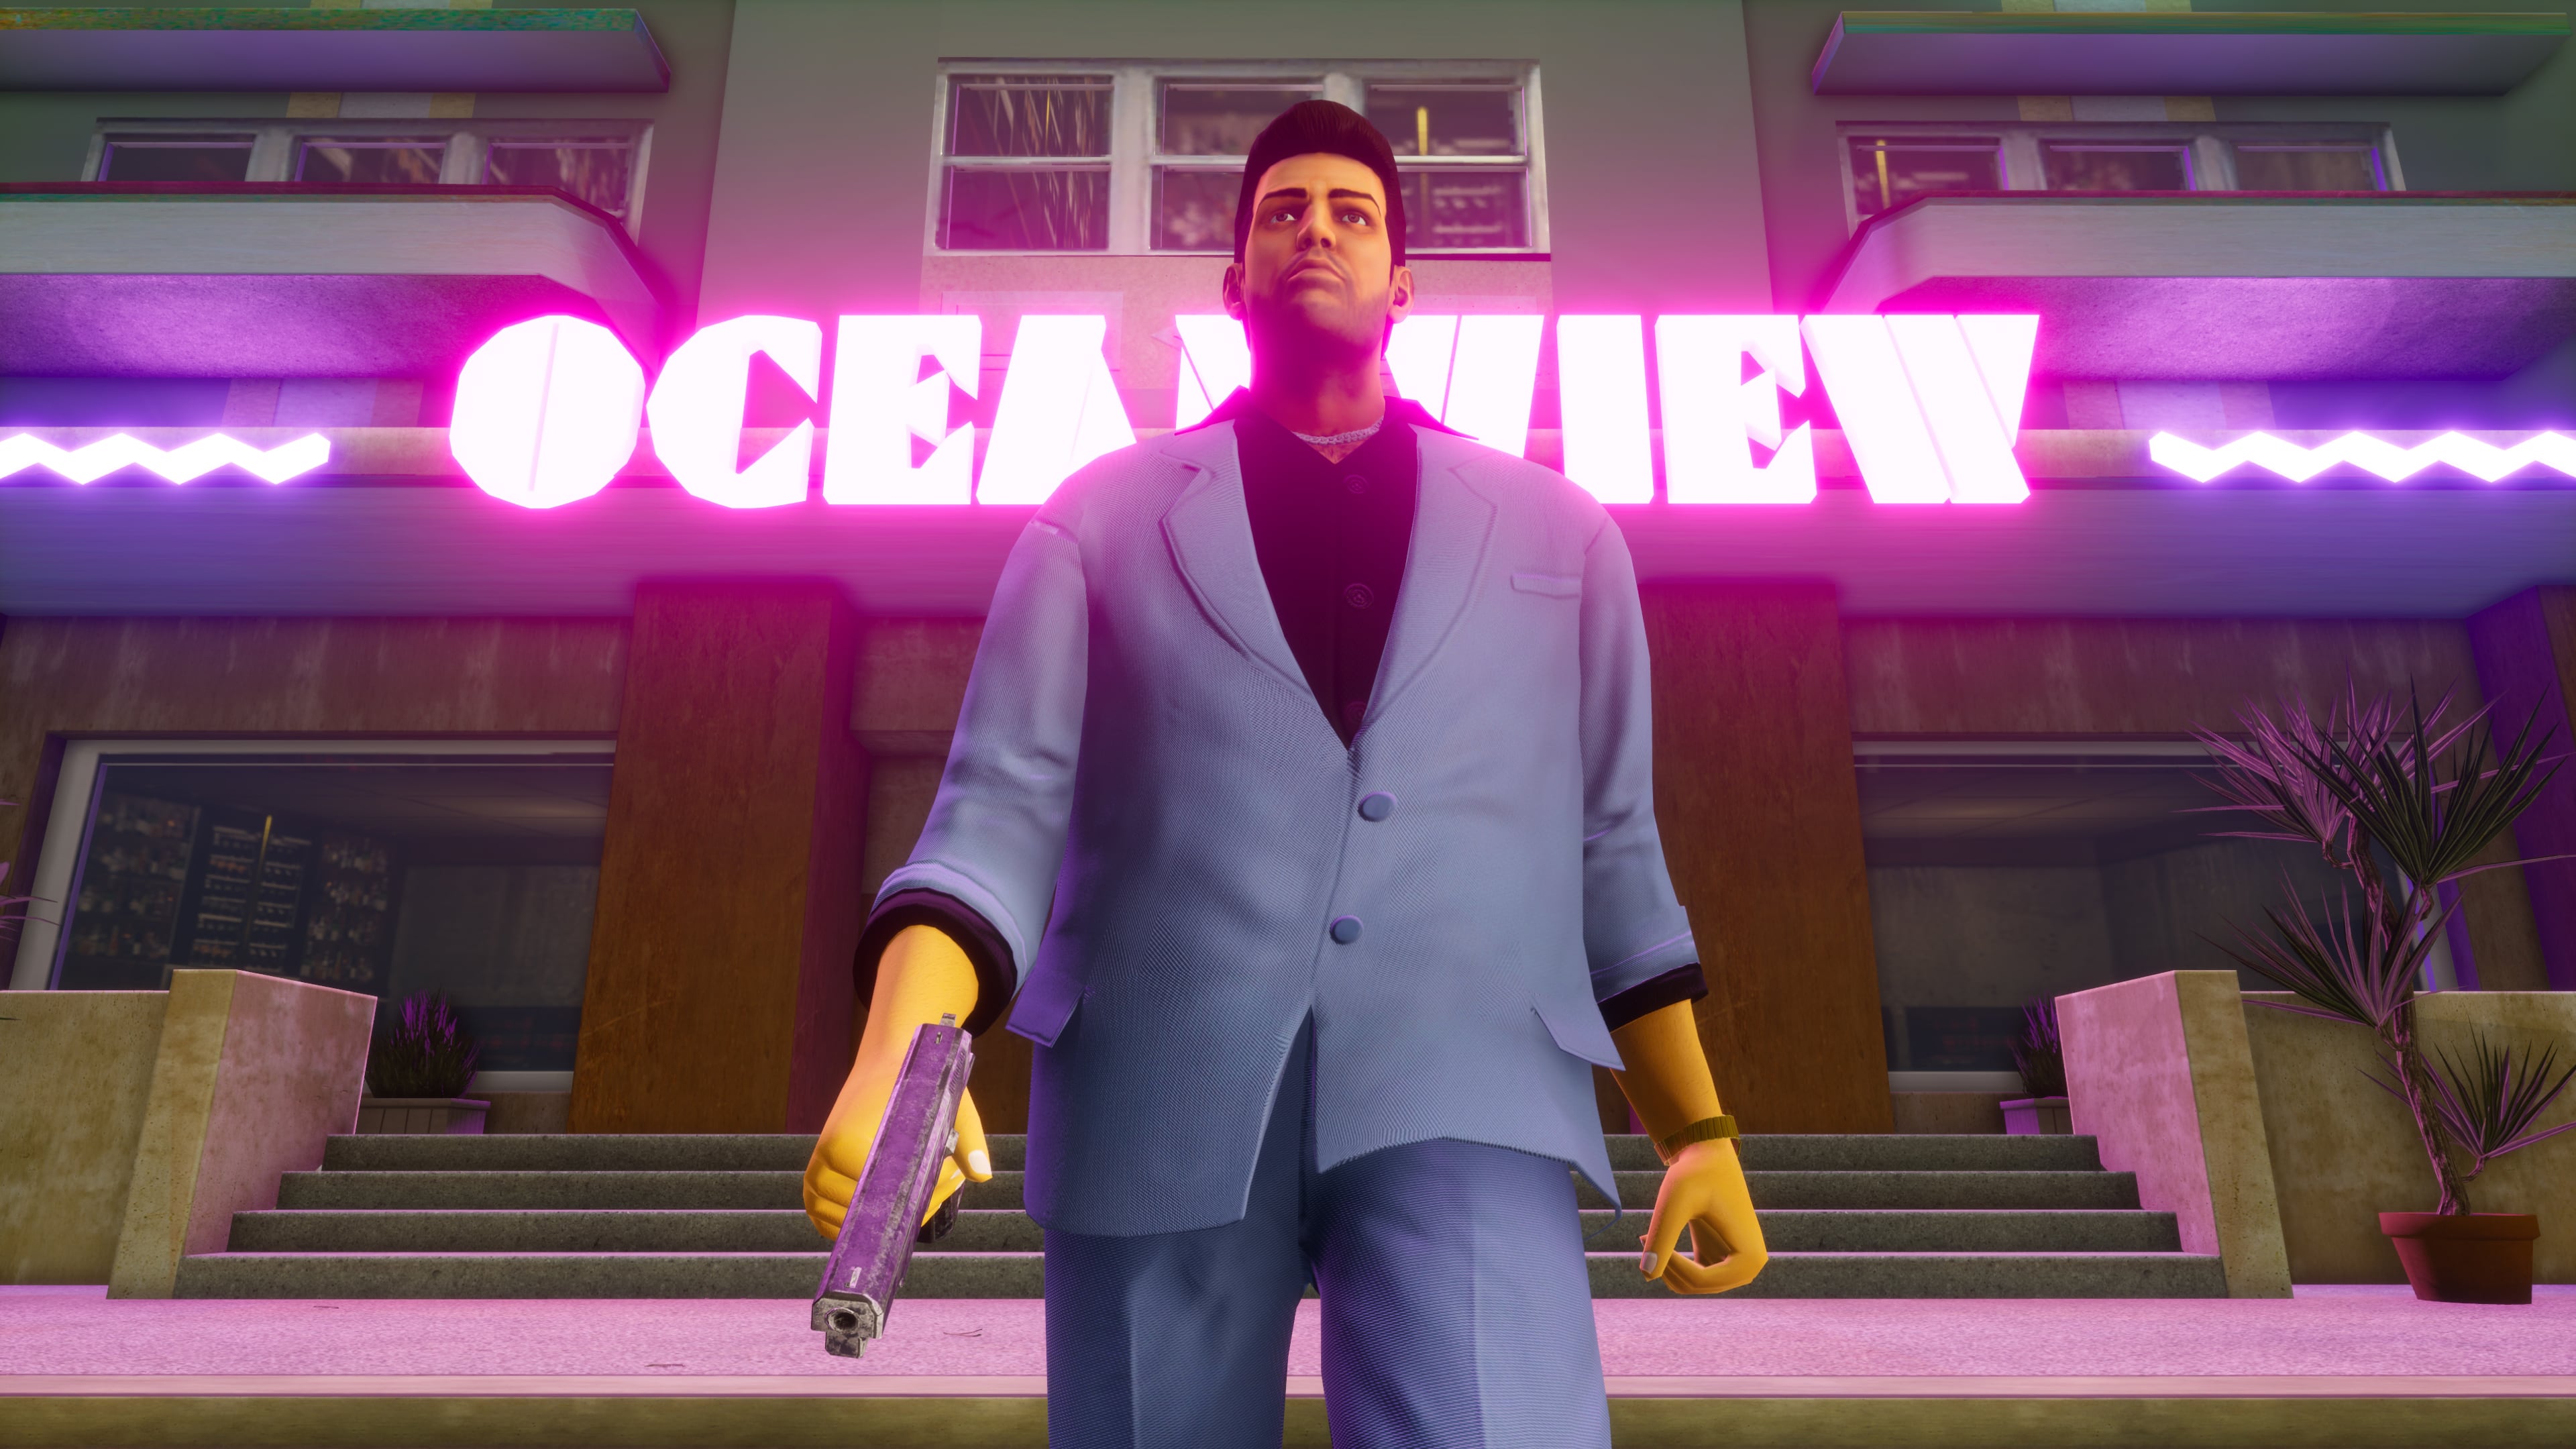 Grand Theft Auto: Vice City - The Definitive Edition Comparison Highlights  Improved Lighting and Shadows and More